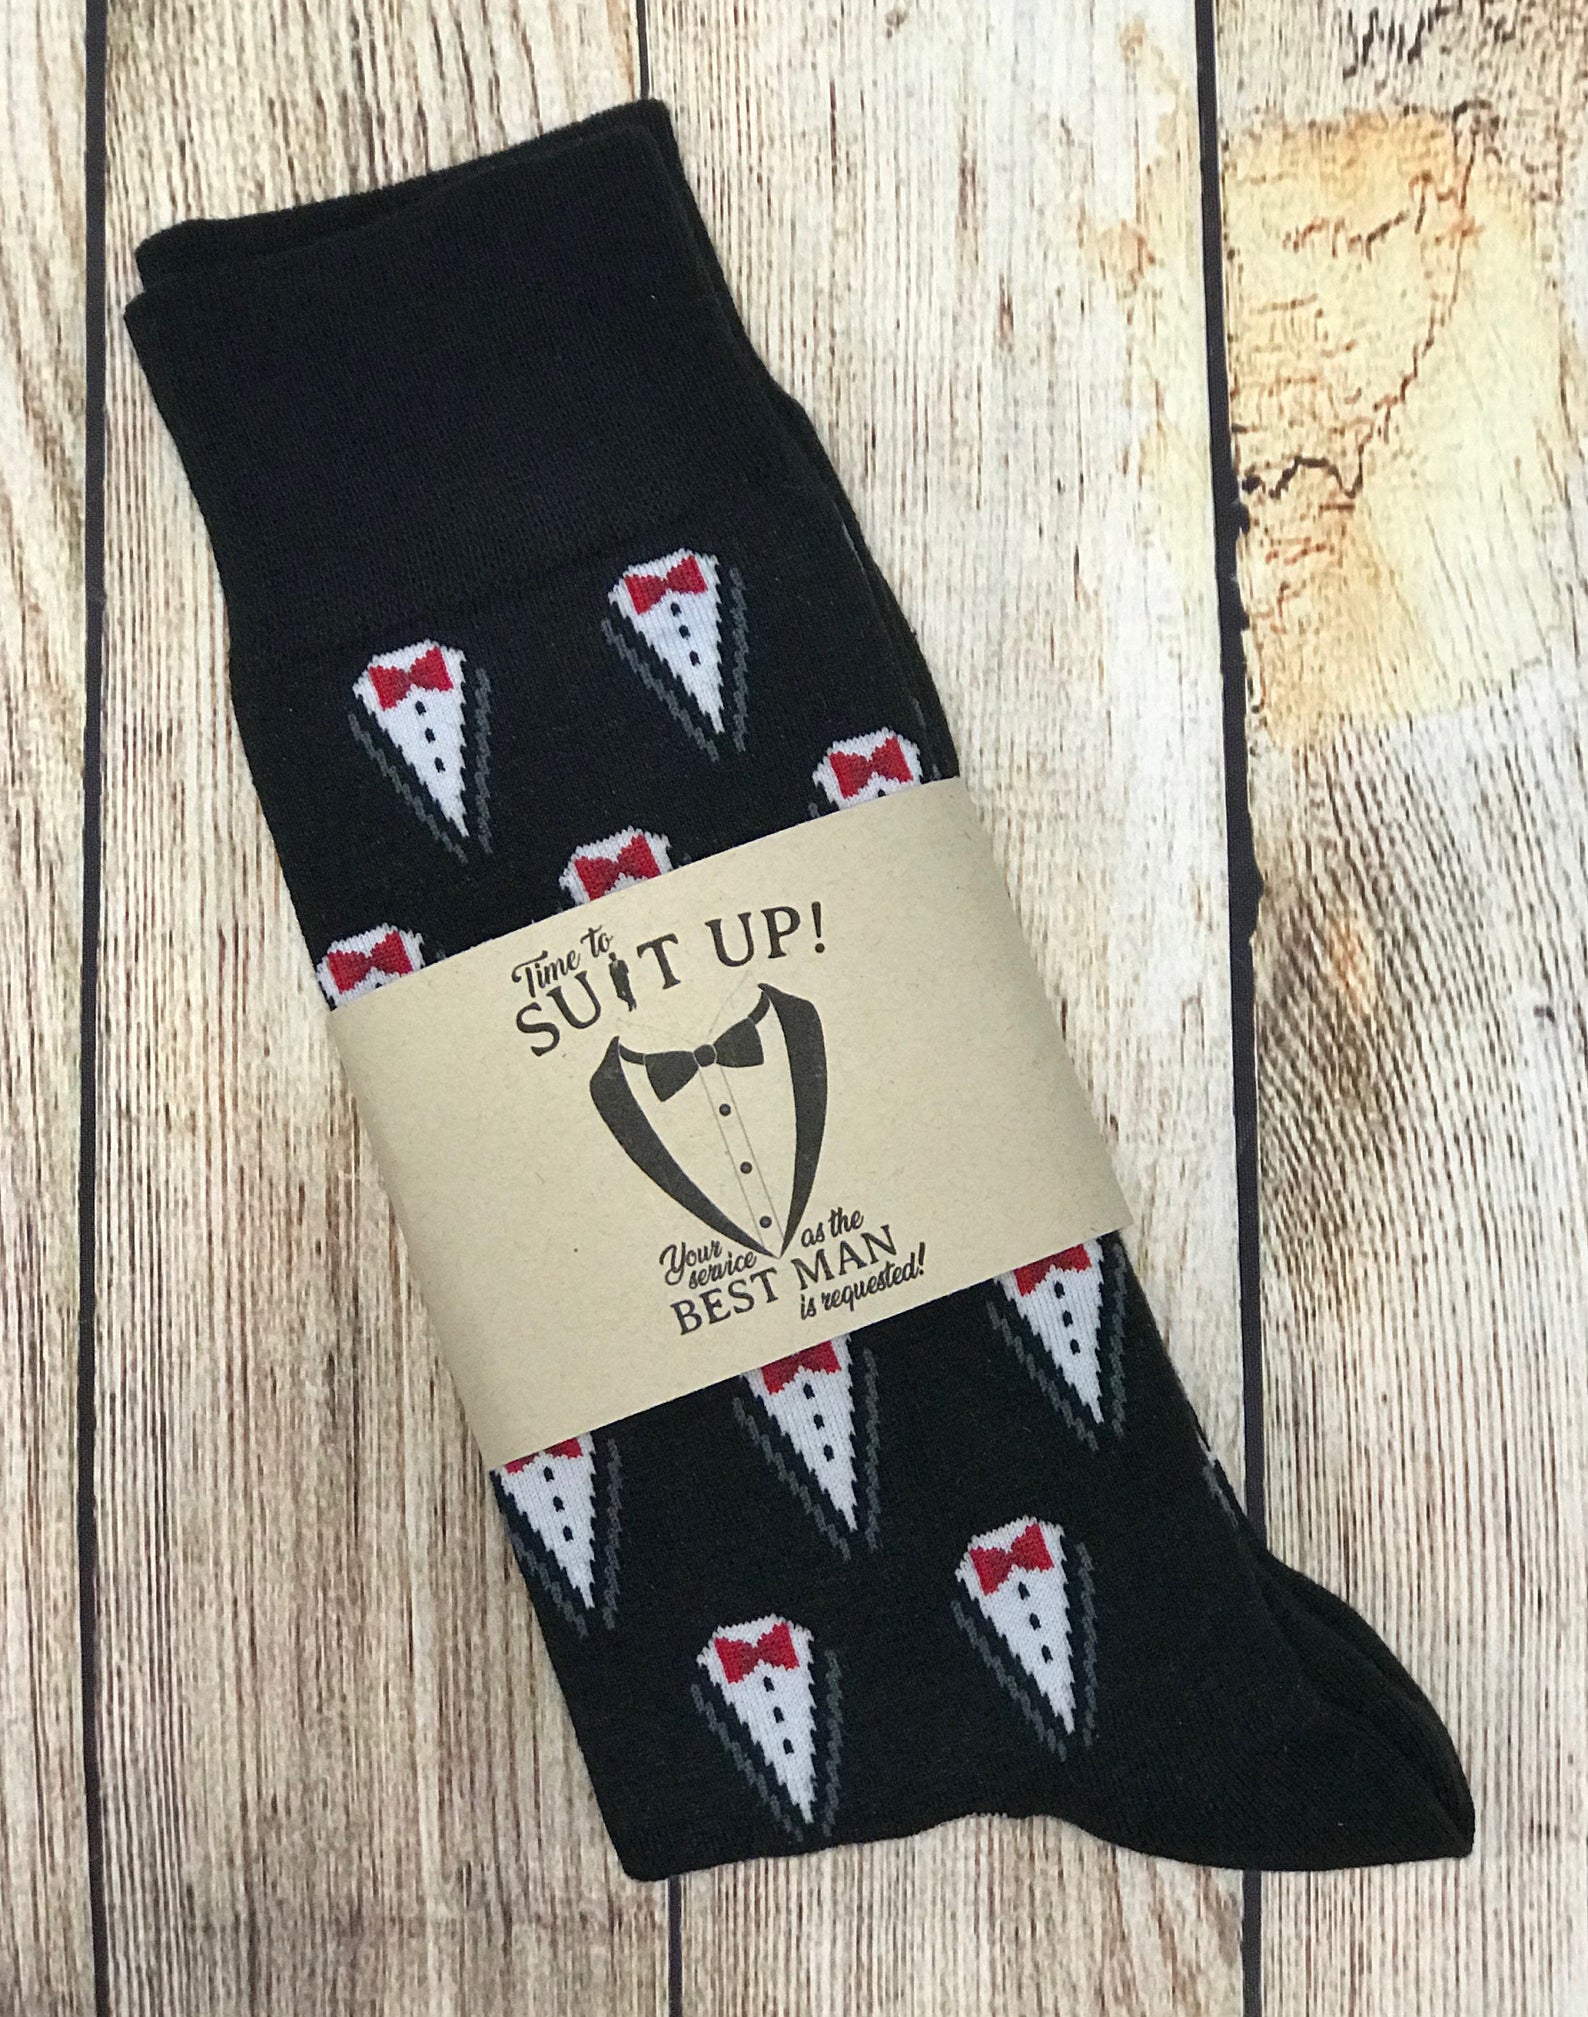 Suit Up Socks by Designs by Daffy